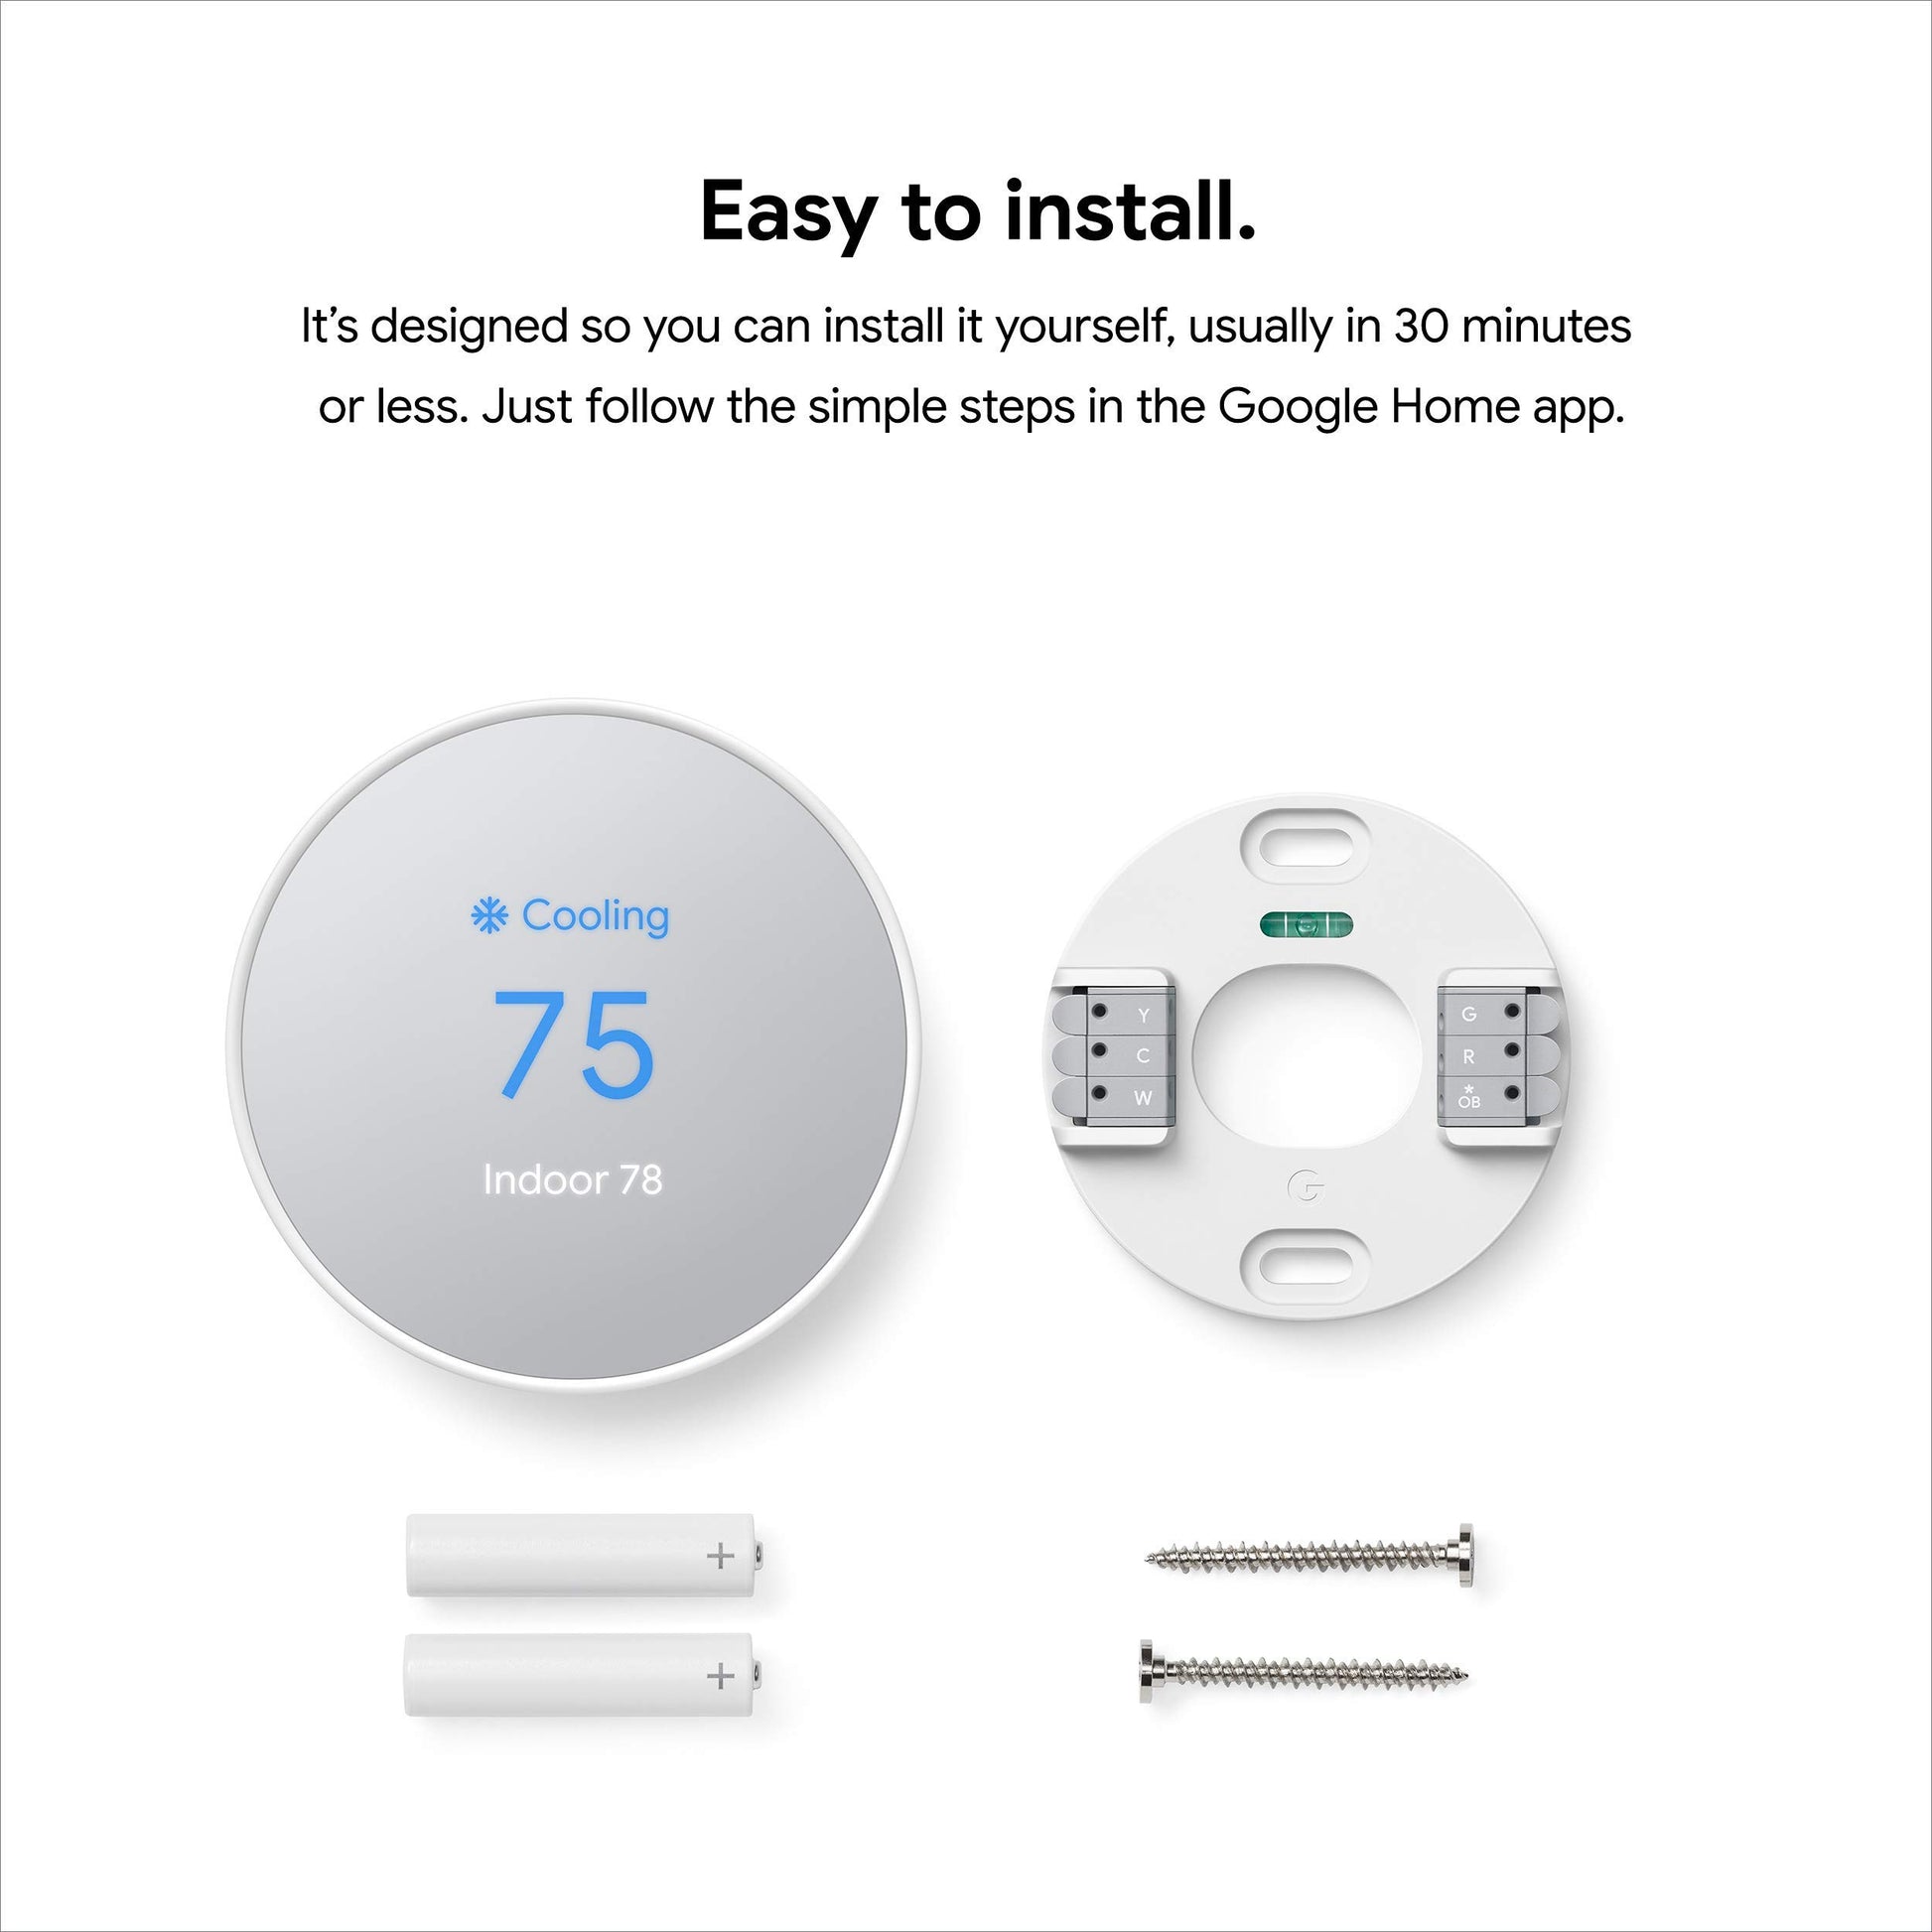 Google Nest Thermostat Phil and Gazelle